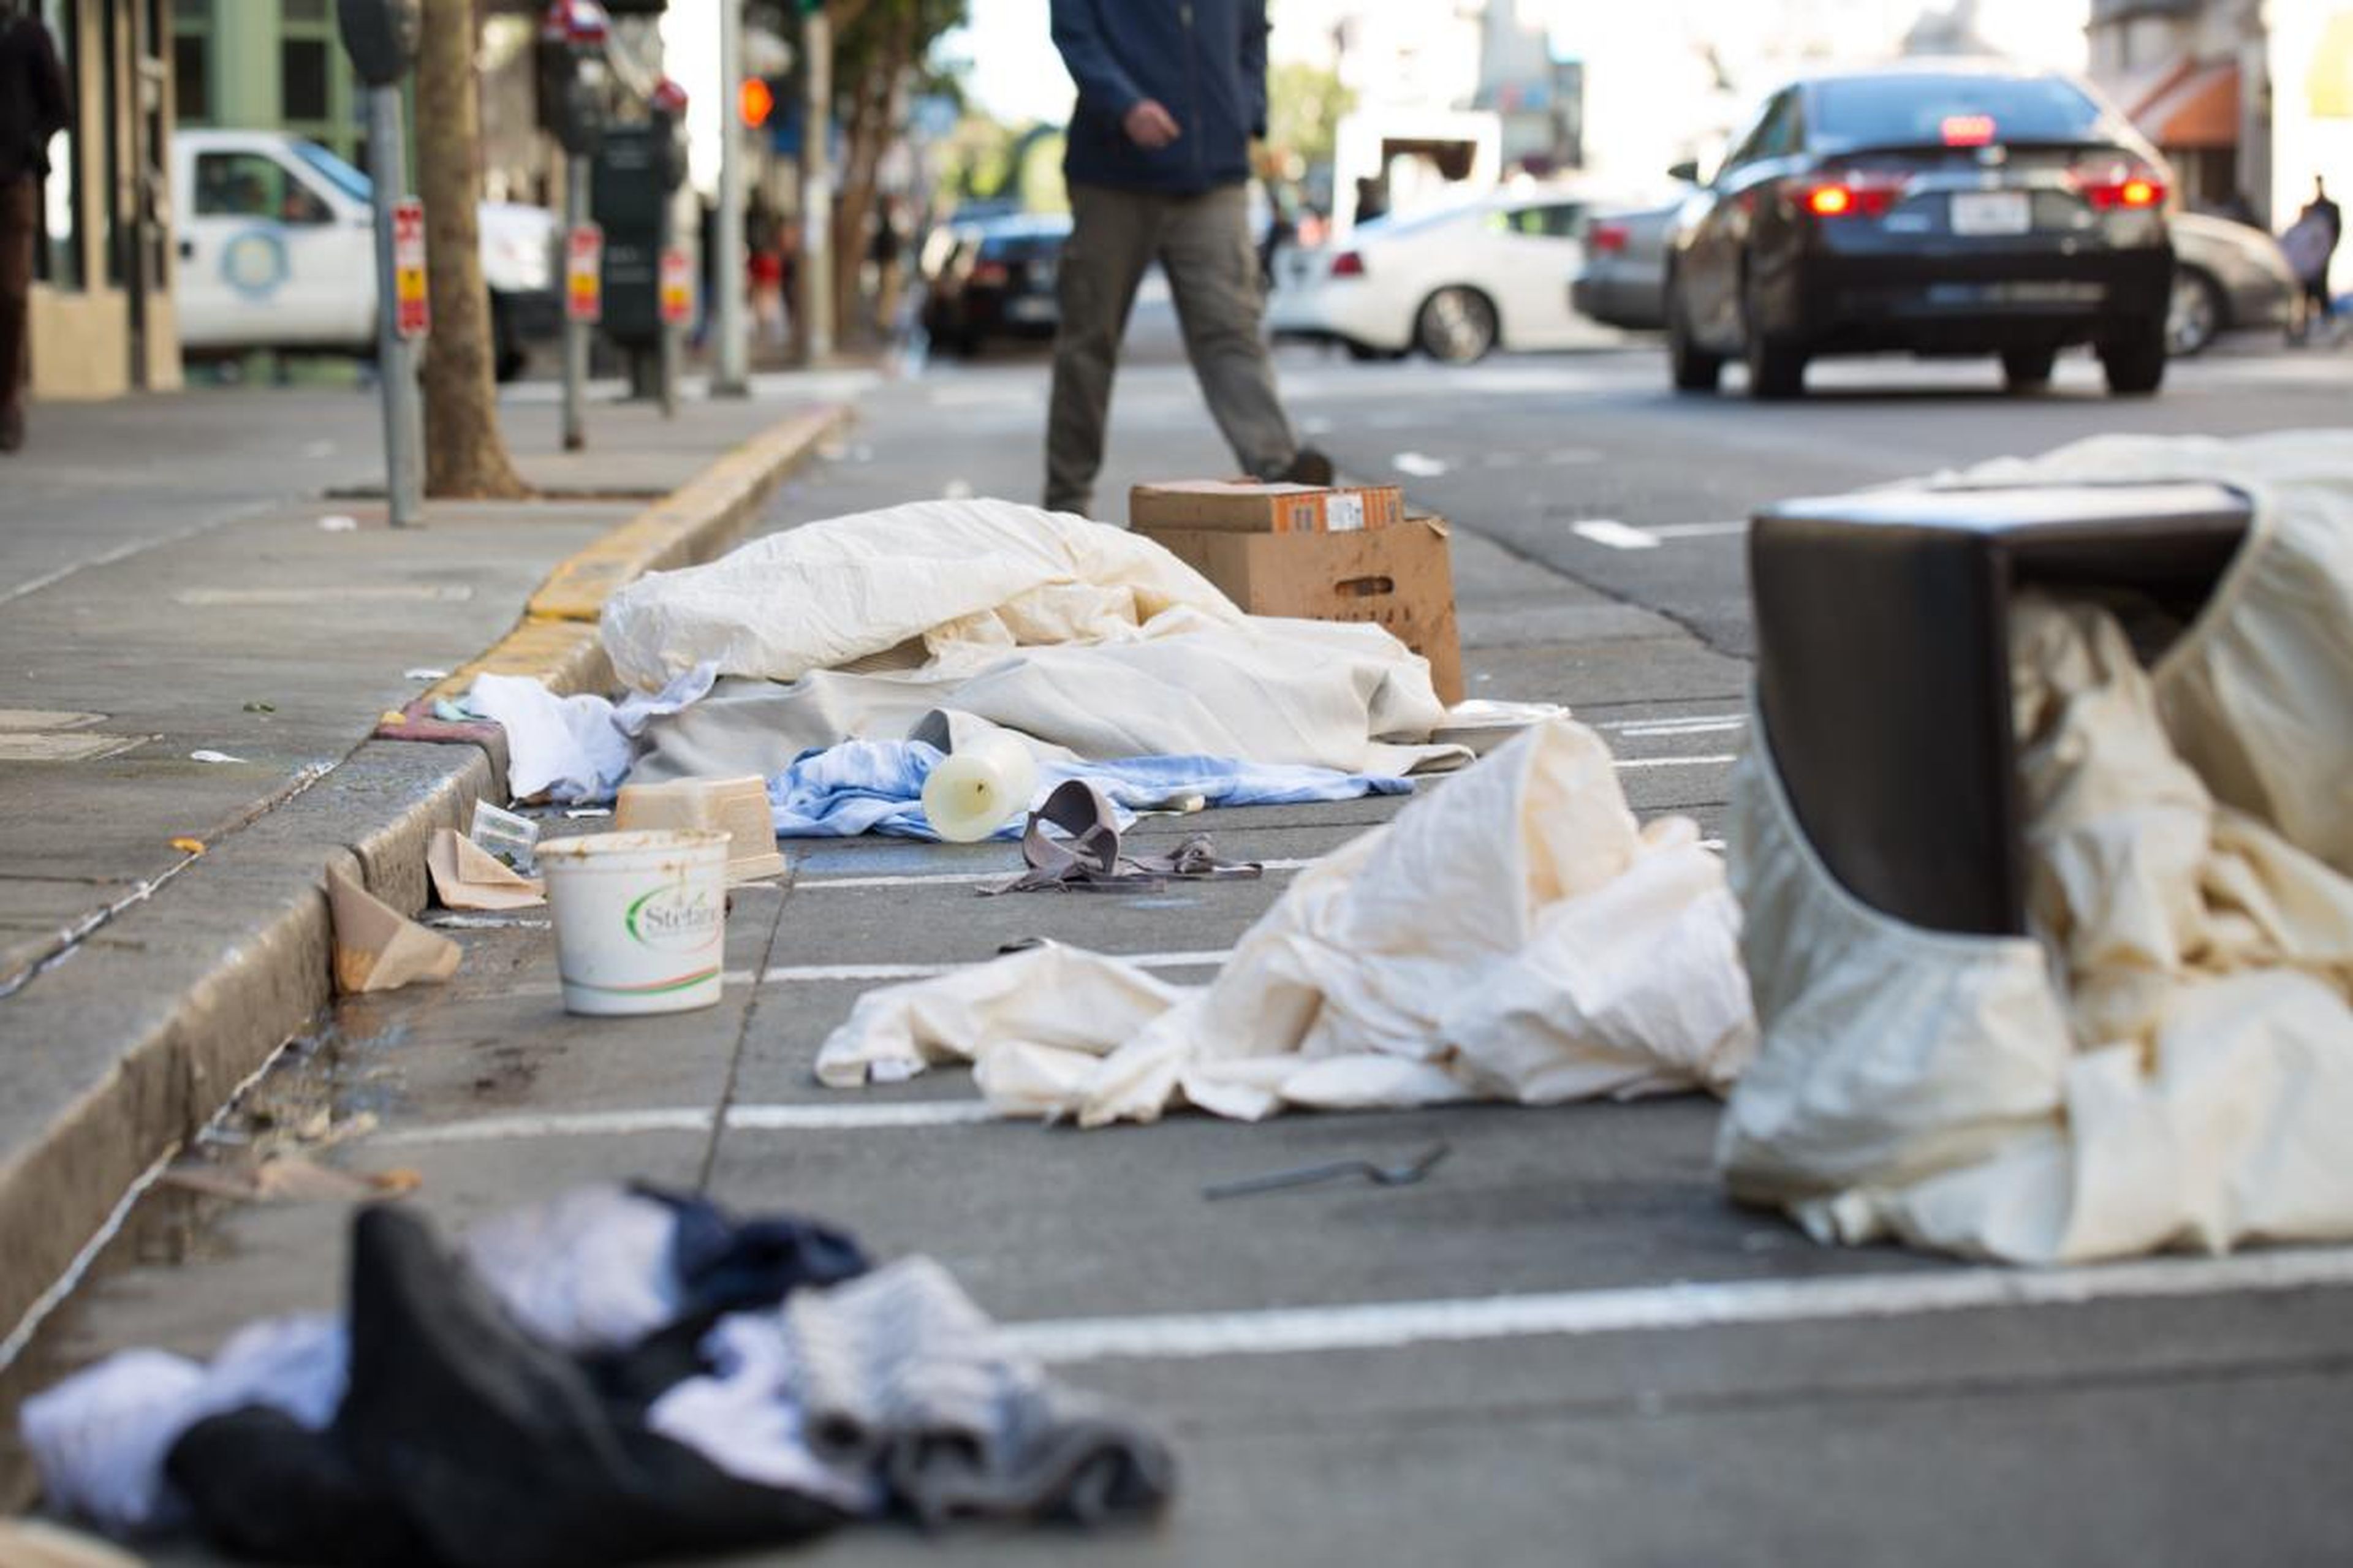 San Francisco's sidewalks are covered with human feces, so the city is launching a 'Poop Patrol' to deal with its No. 2 problem